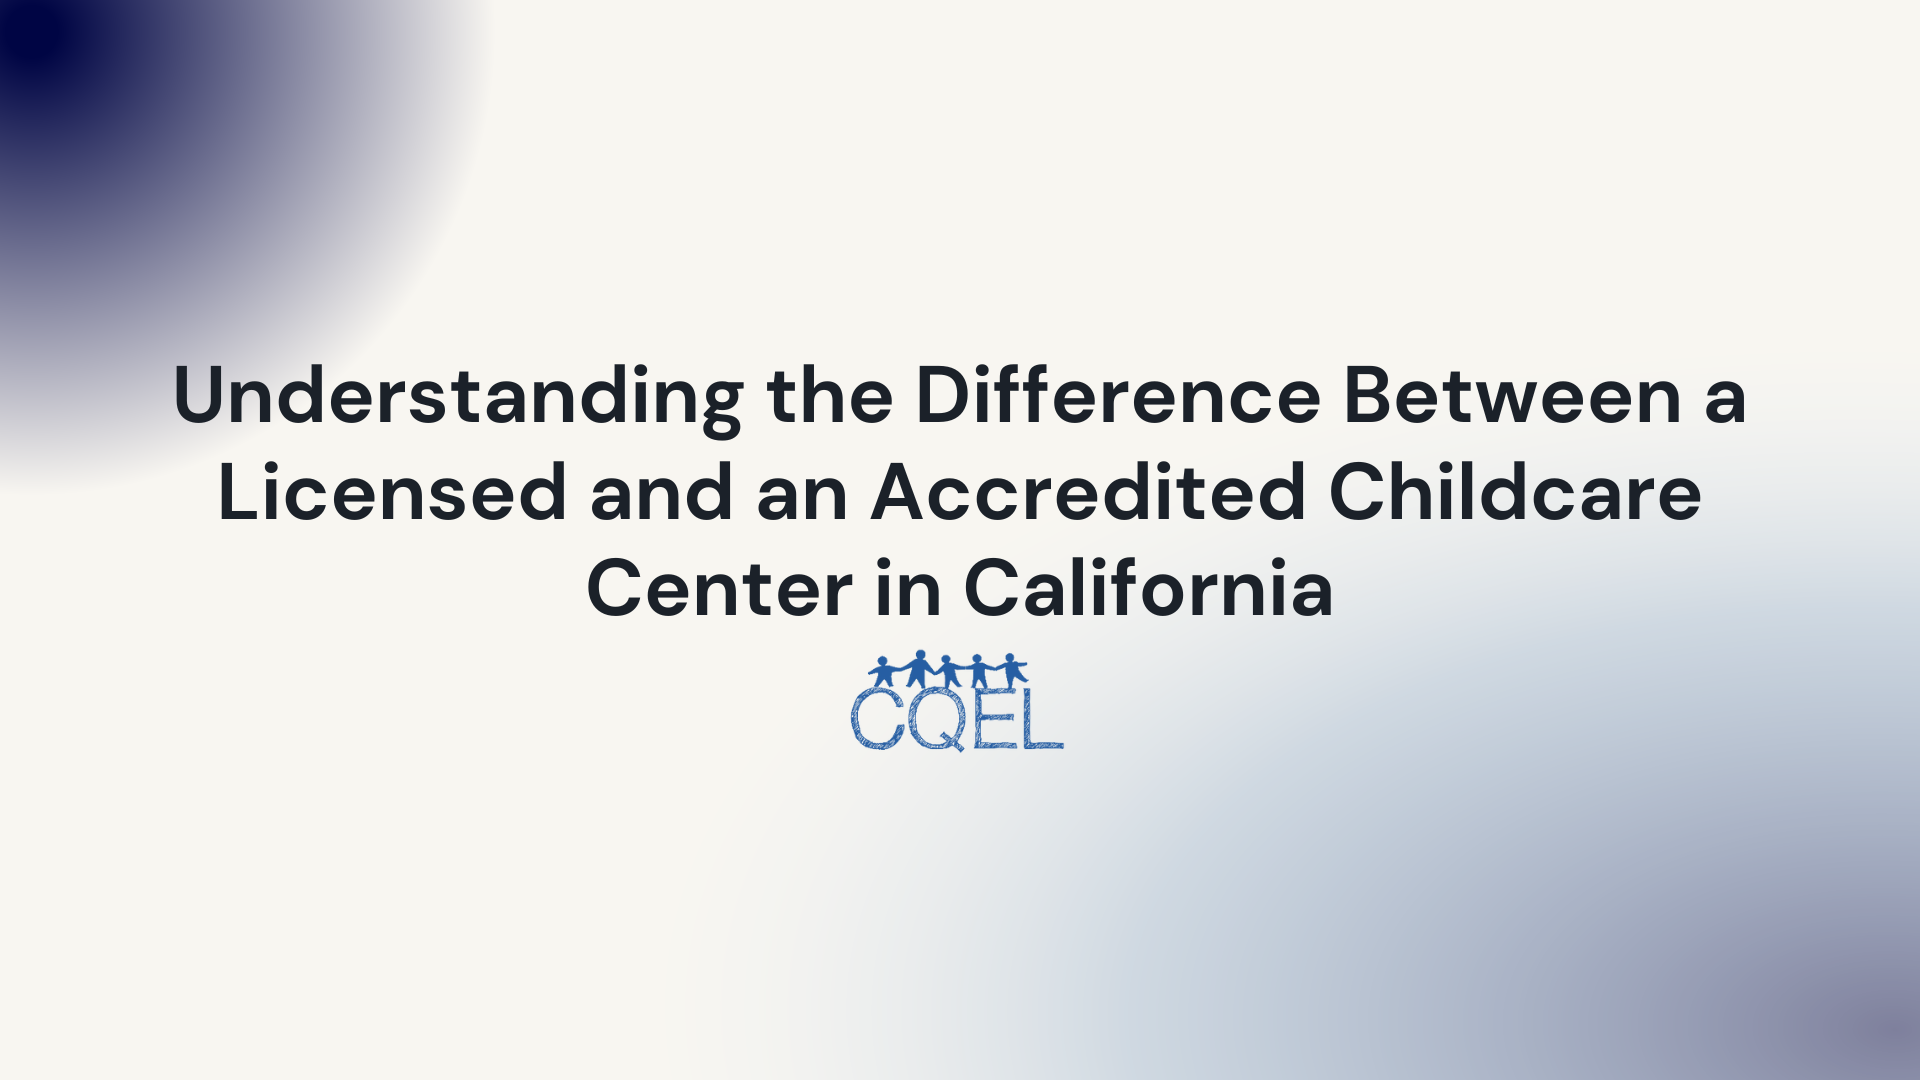 Understanding the Difference Between a Licensed and an Accredited Childcare Center in California